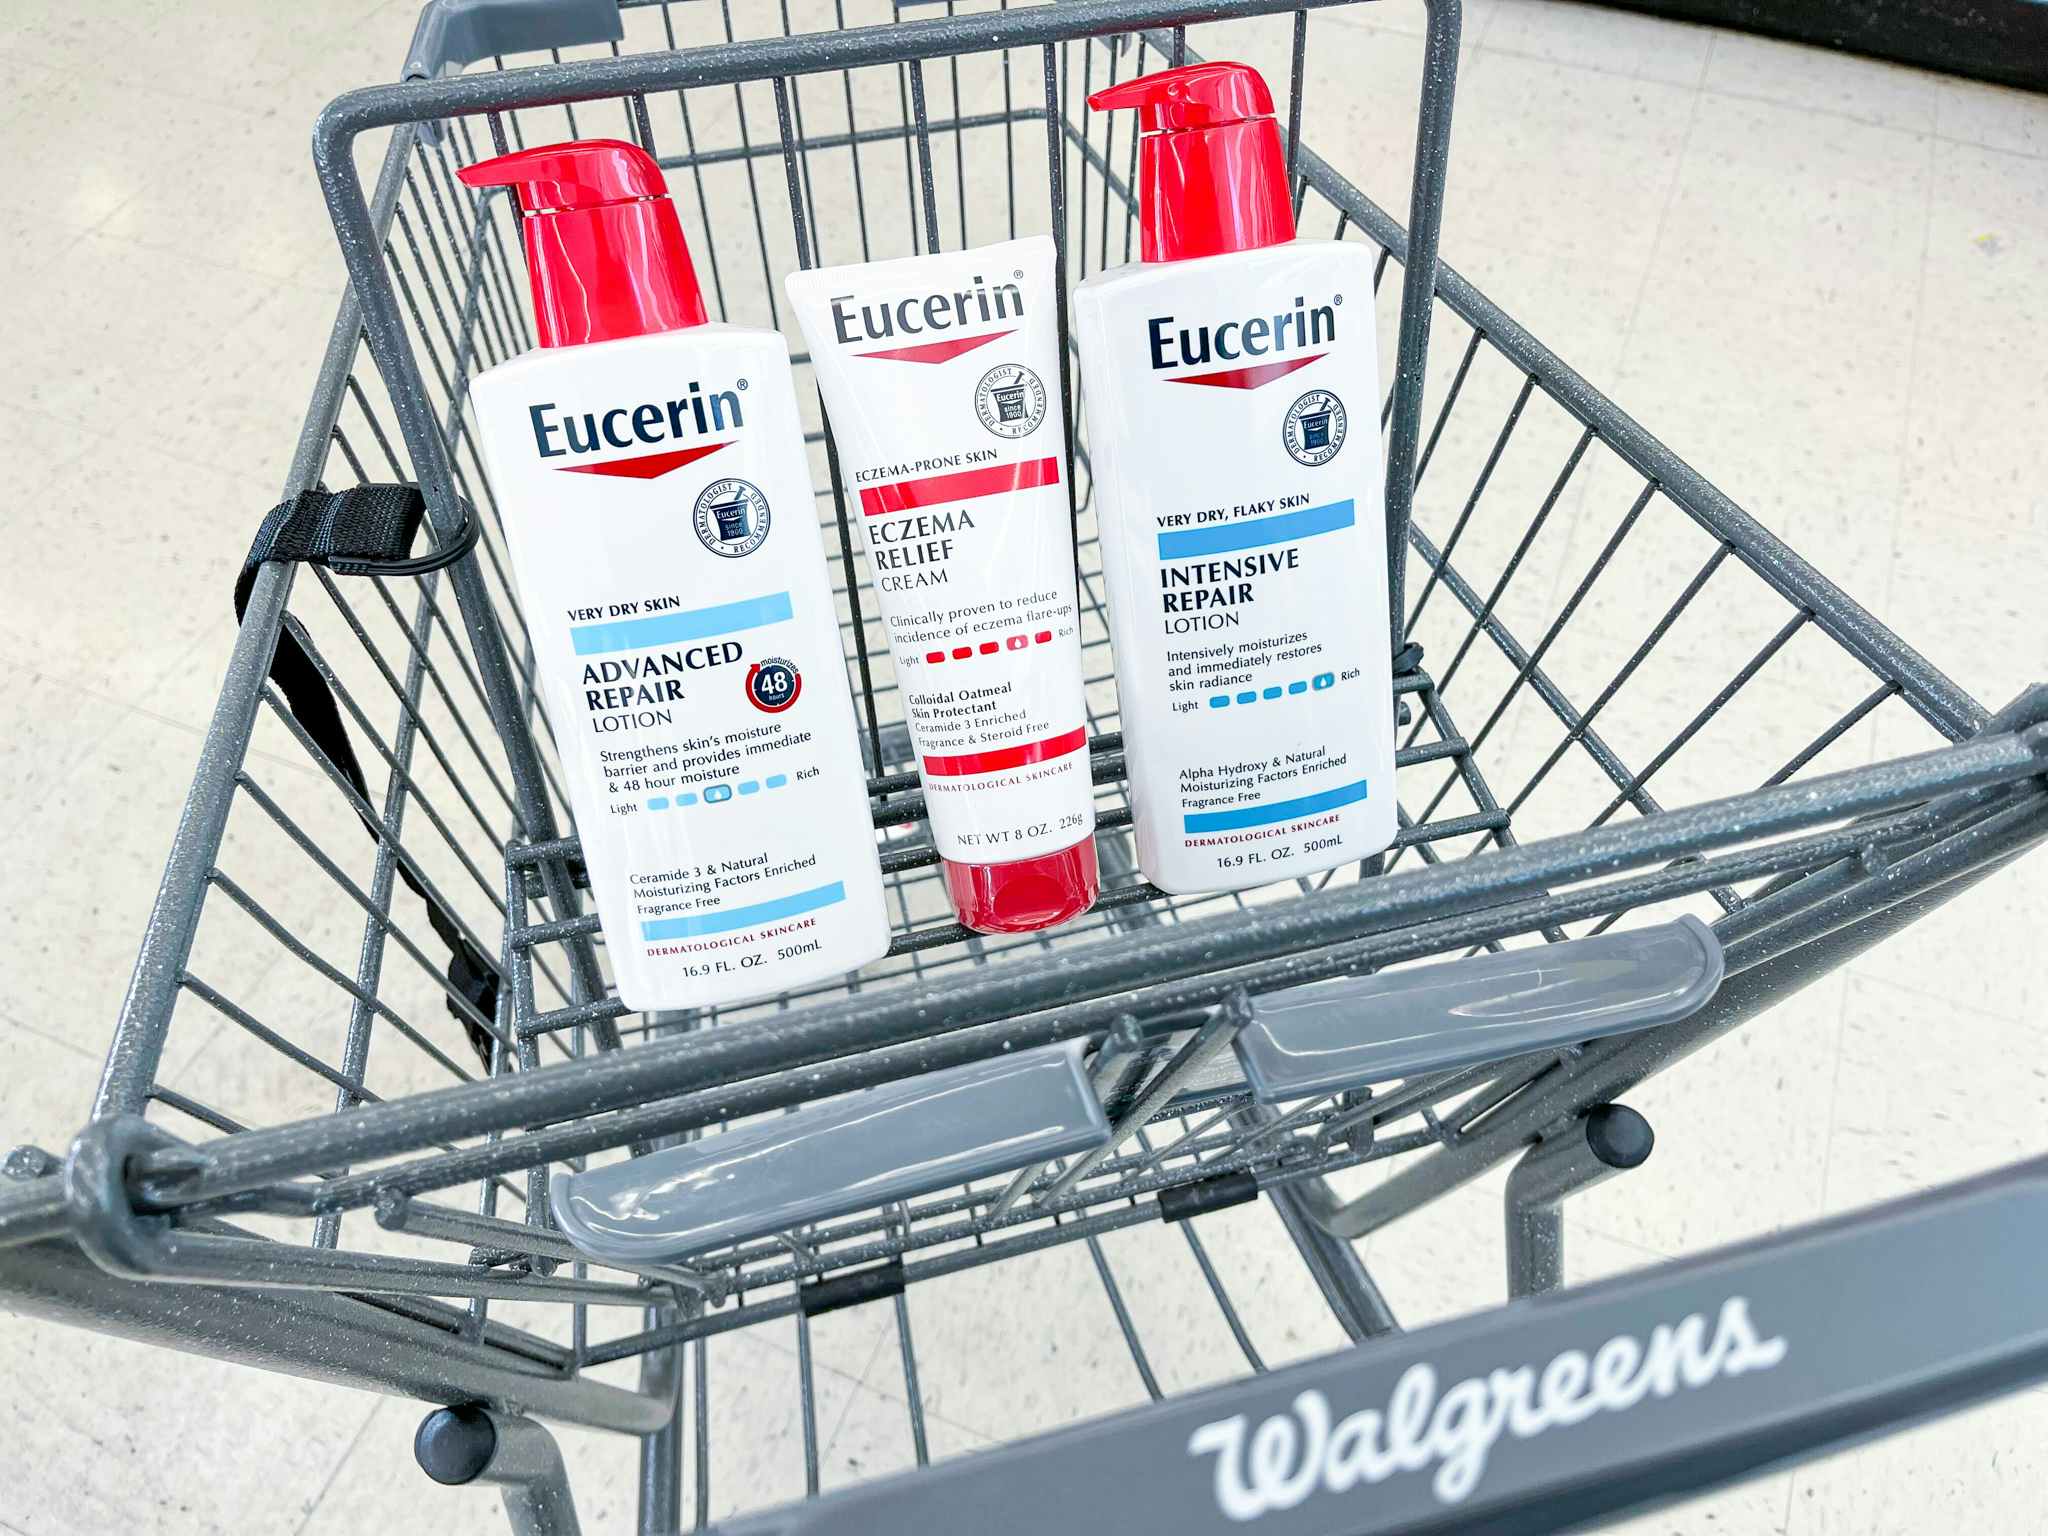 three eucerin lotions and creams in shopping cart